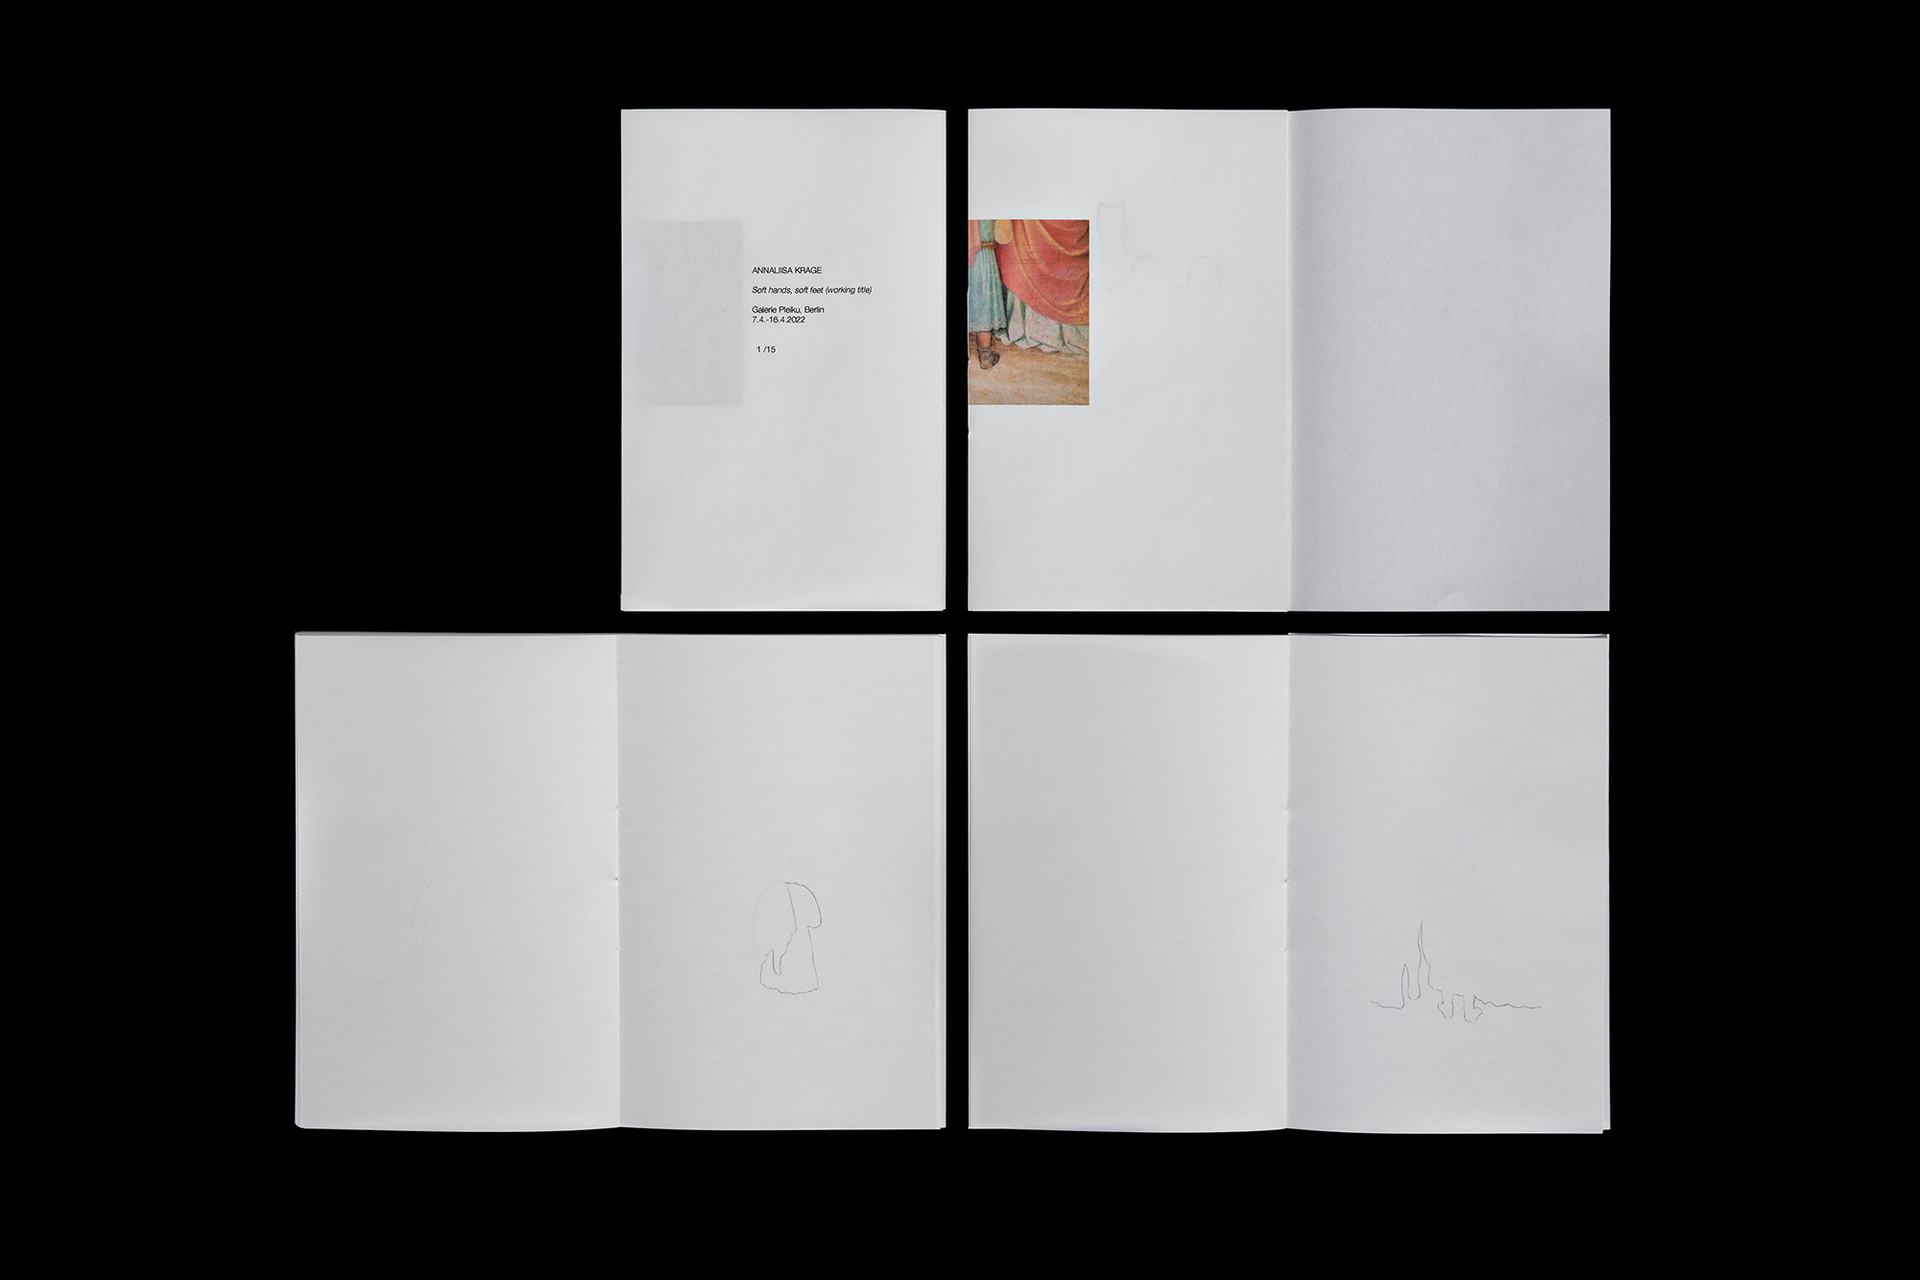 Annaliisa Krage, Soft hands, soft feet (working title), 2022,  Exhibition catalogue, 13,7 x 21 cm, 32 pages, edition of 15